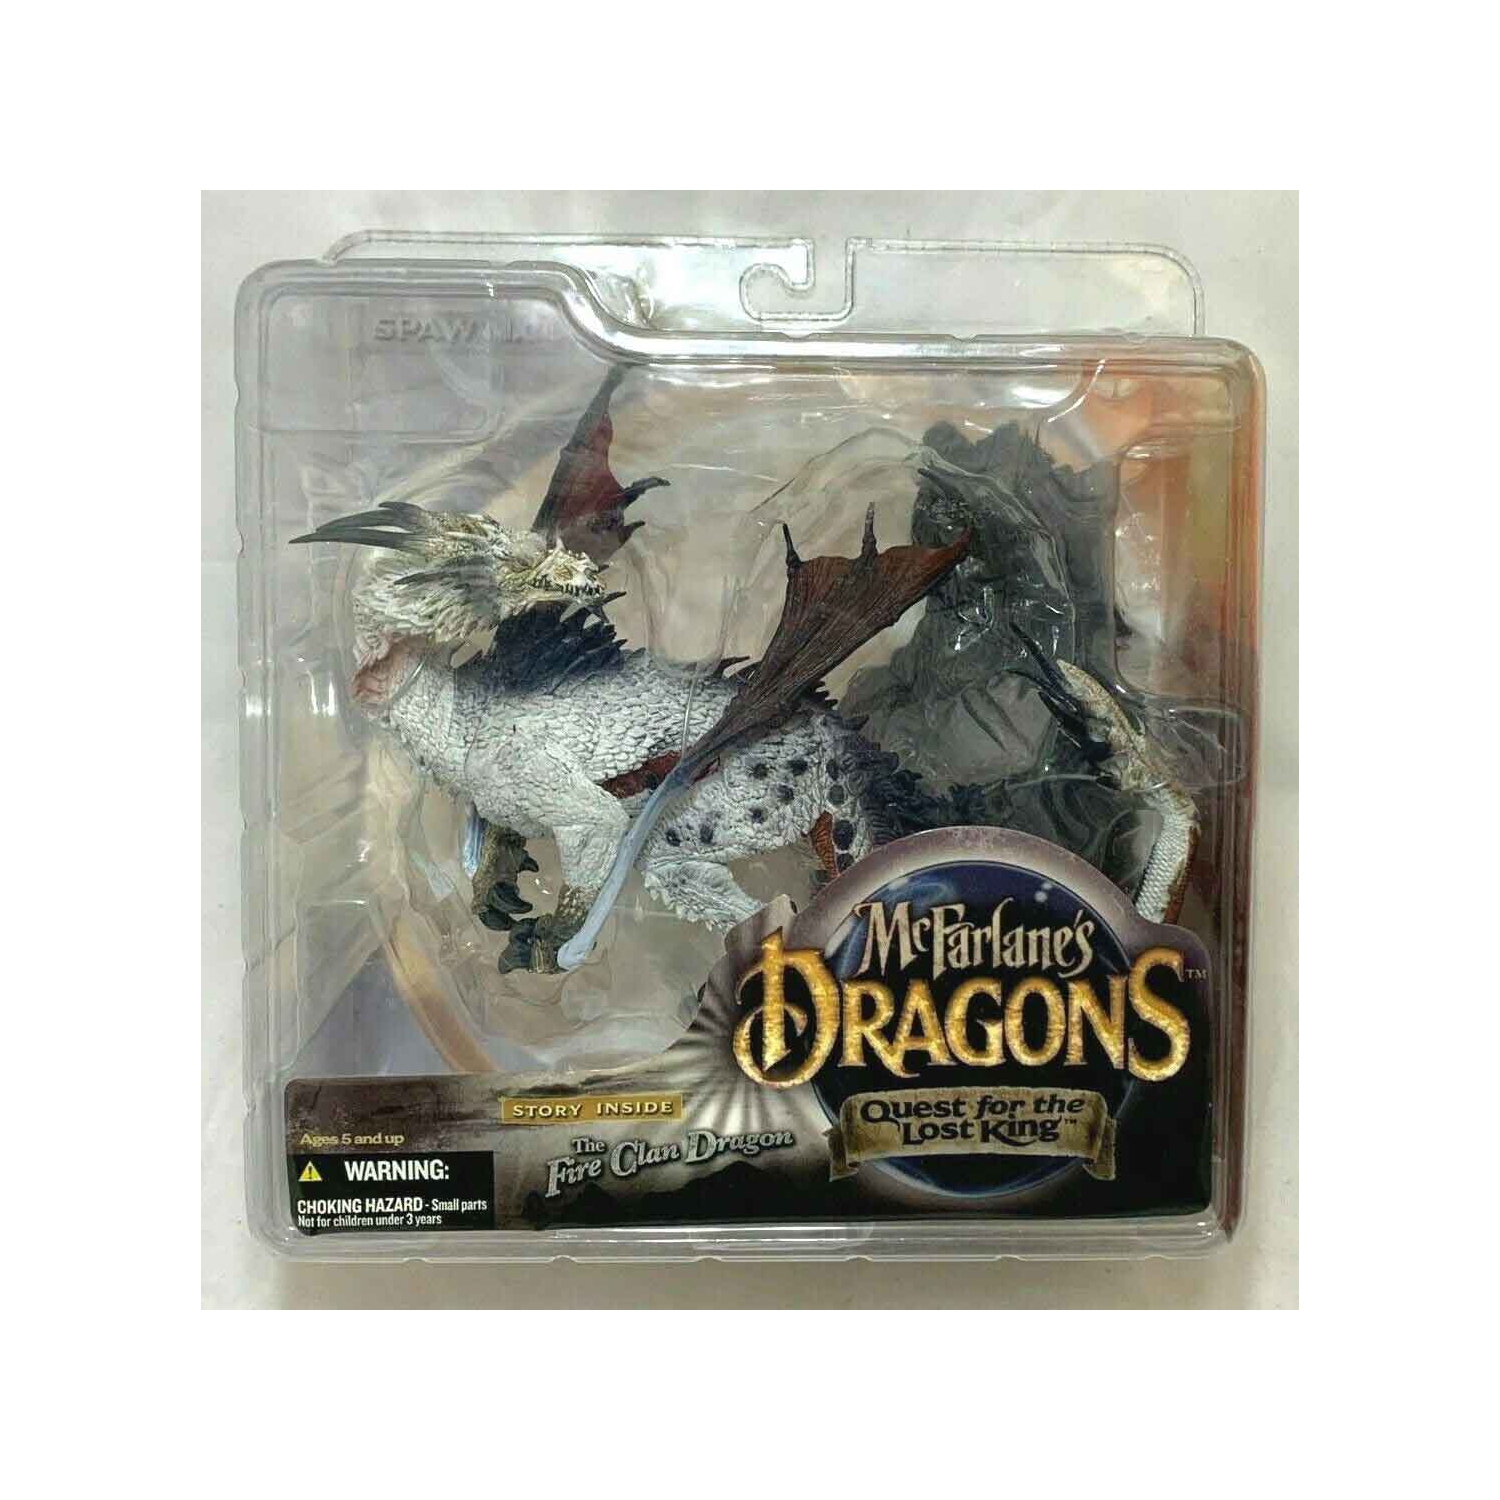 McFarlane Dragons Quest For The Lost King 6 Inch Static Figure - Fire Clan Dragon